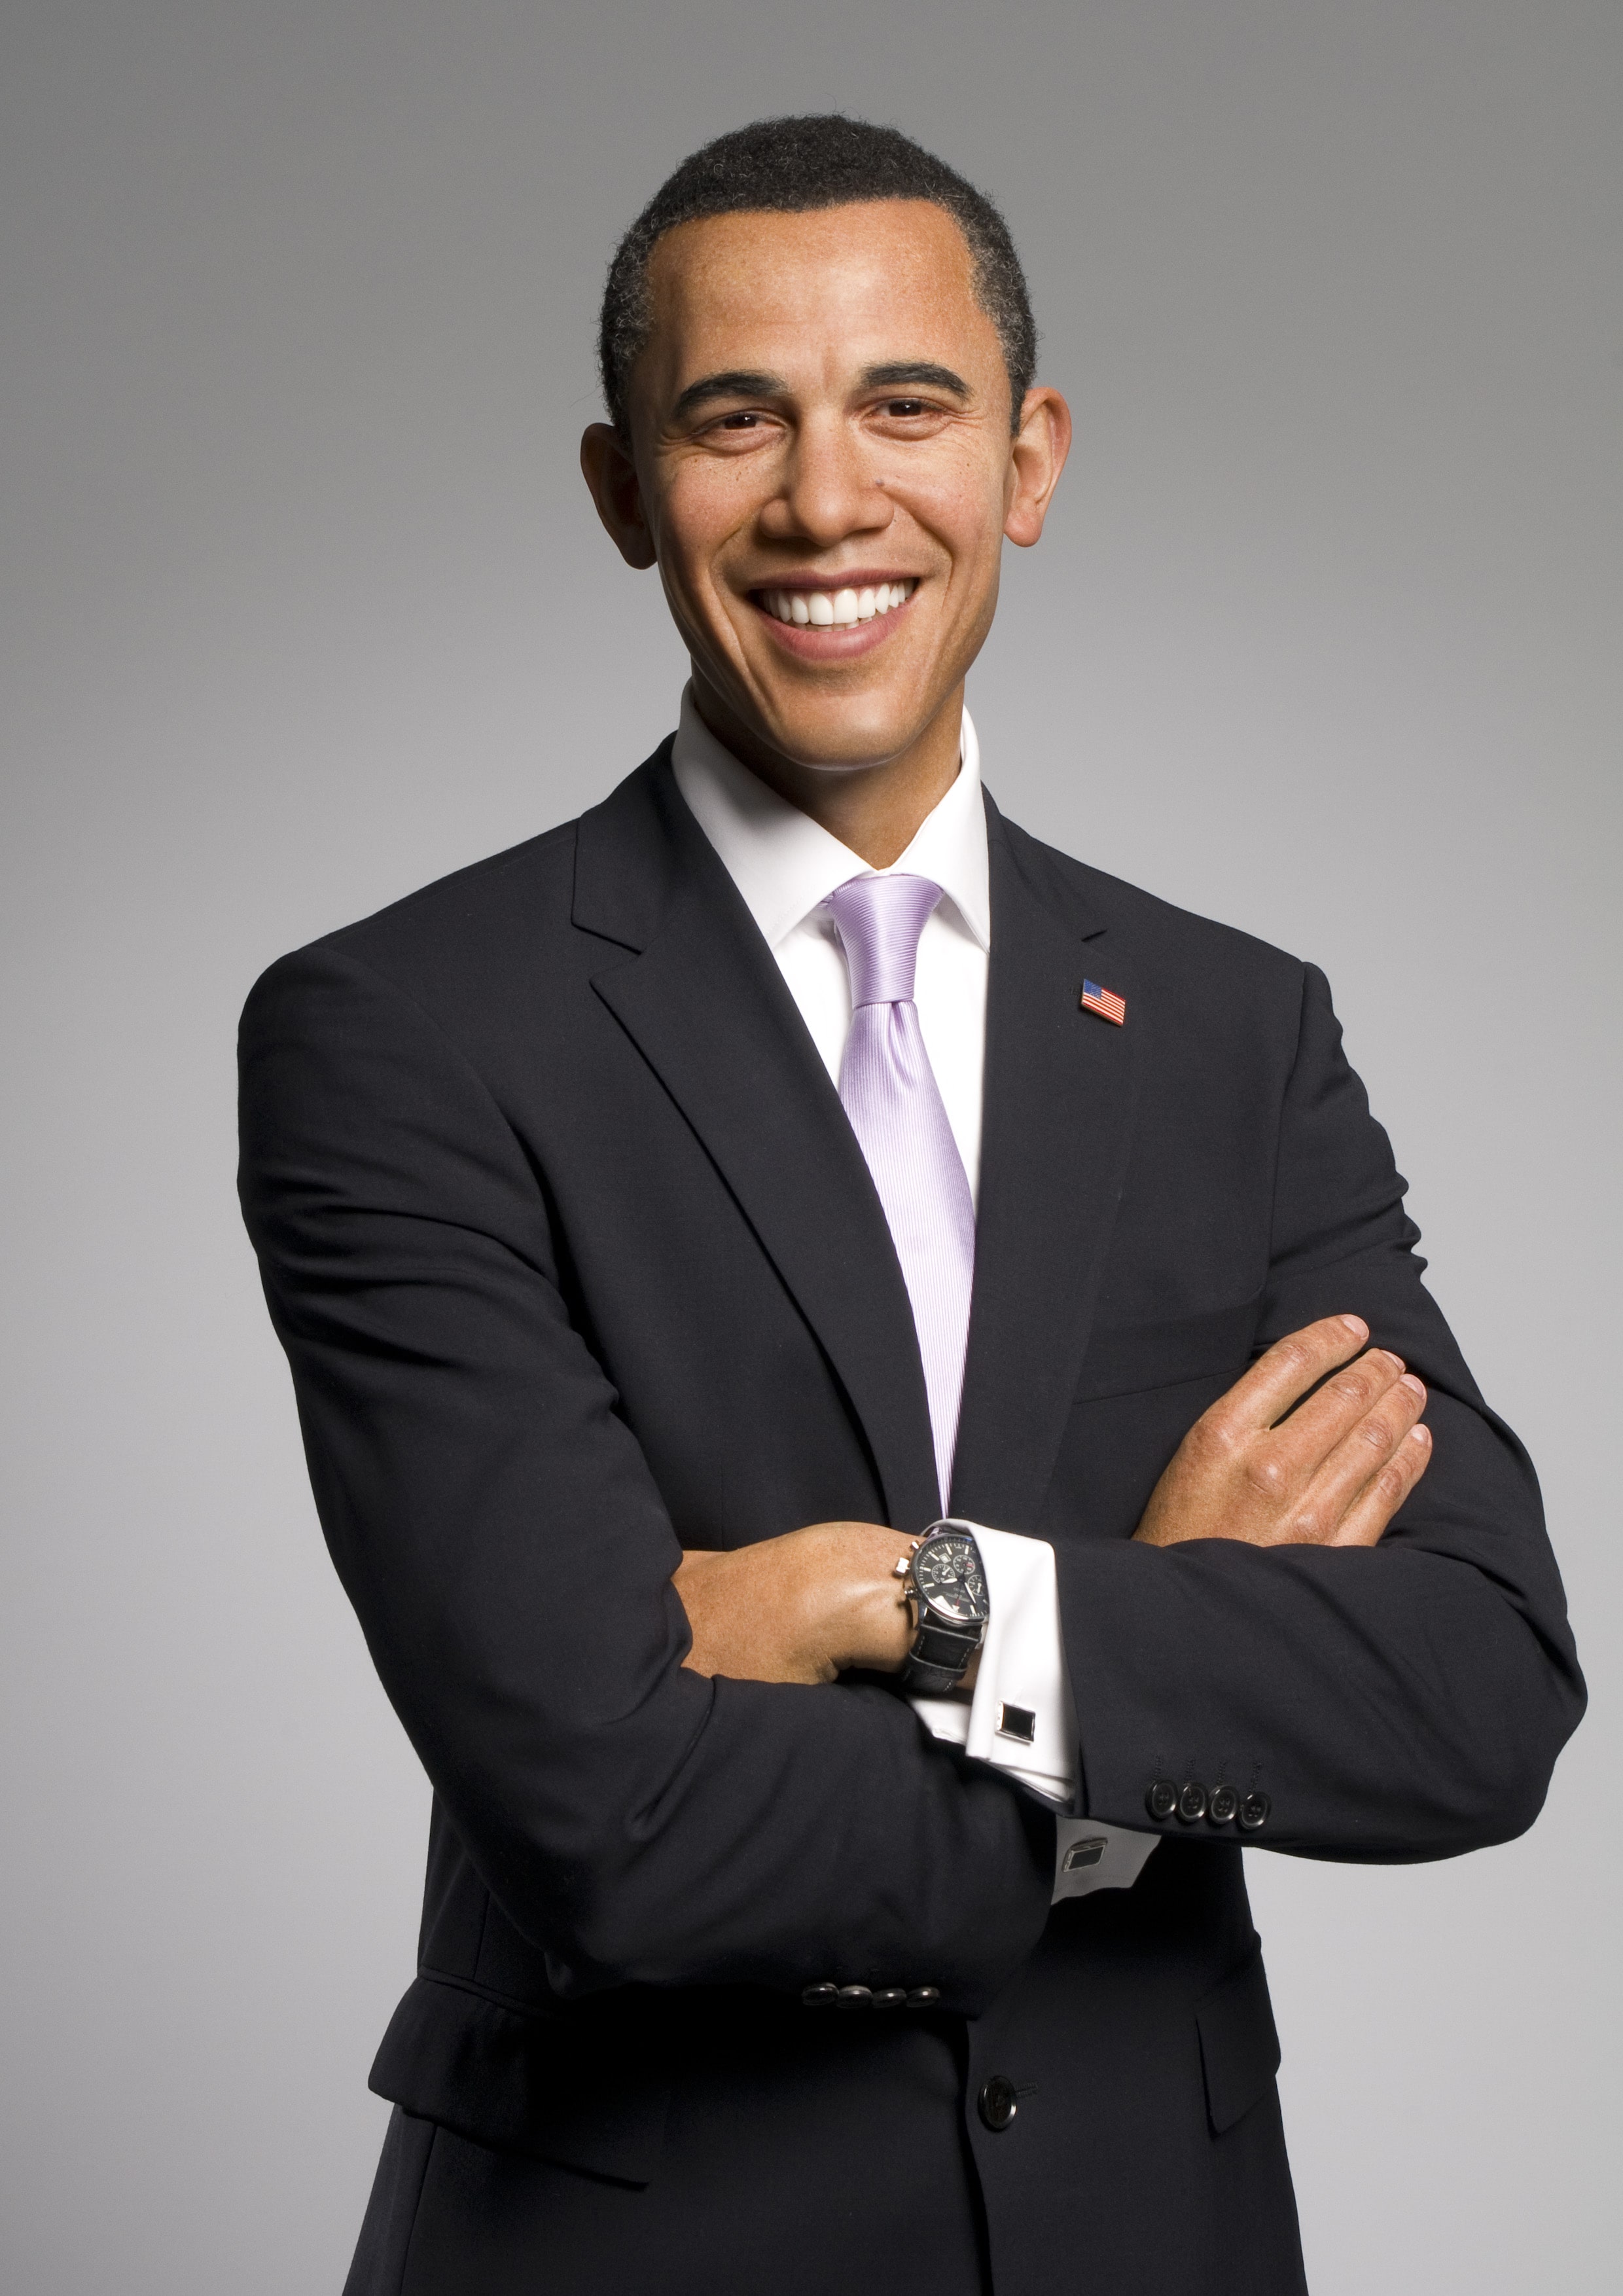 Snap a photo with Barack Obama at Madame Tussauds™ Wien